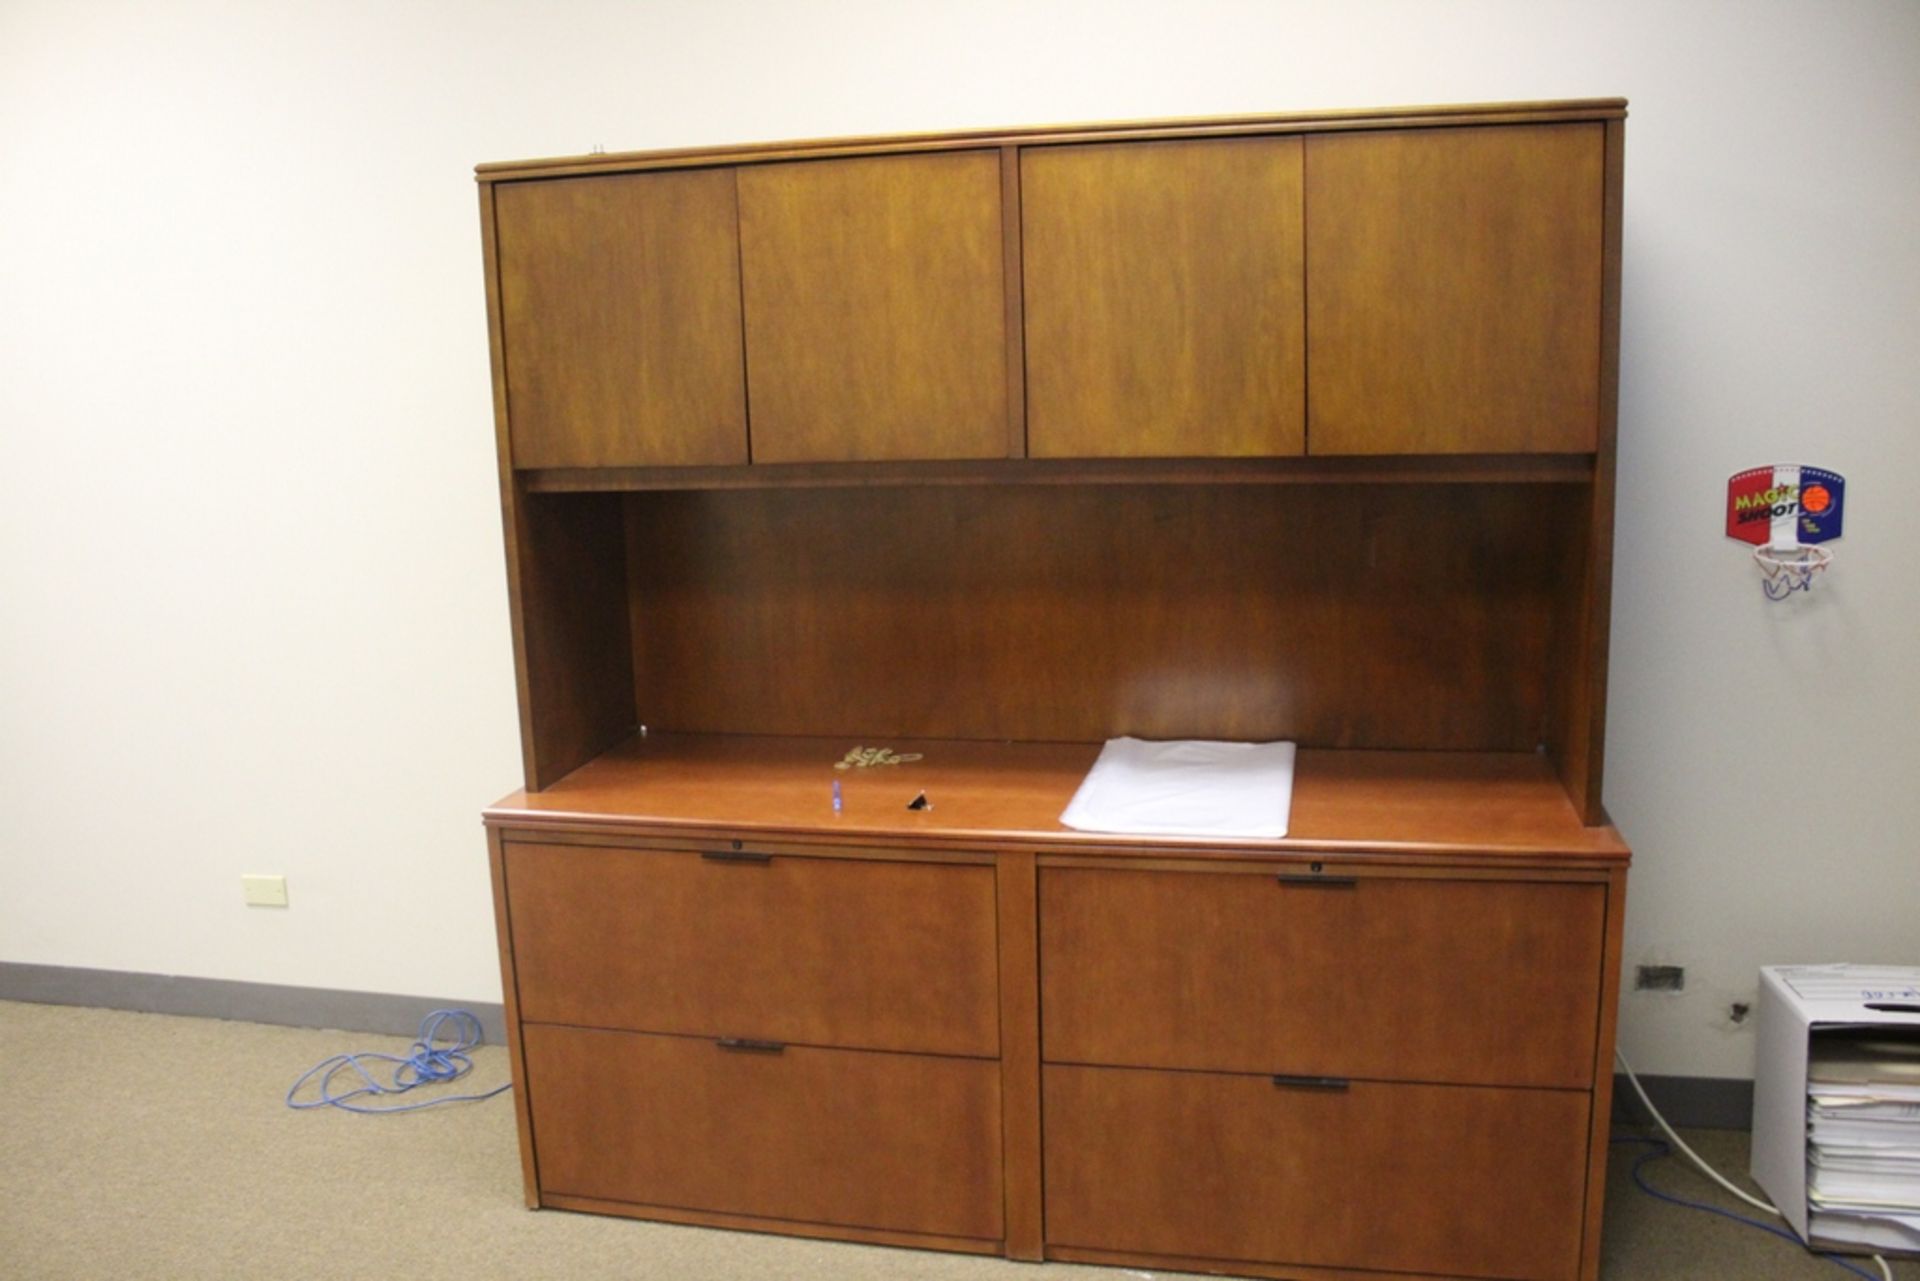 U-SHAPED OFFICE DESK, 114" X 72" WITH CREDENZA - Image 5 of 5